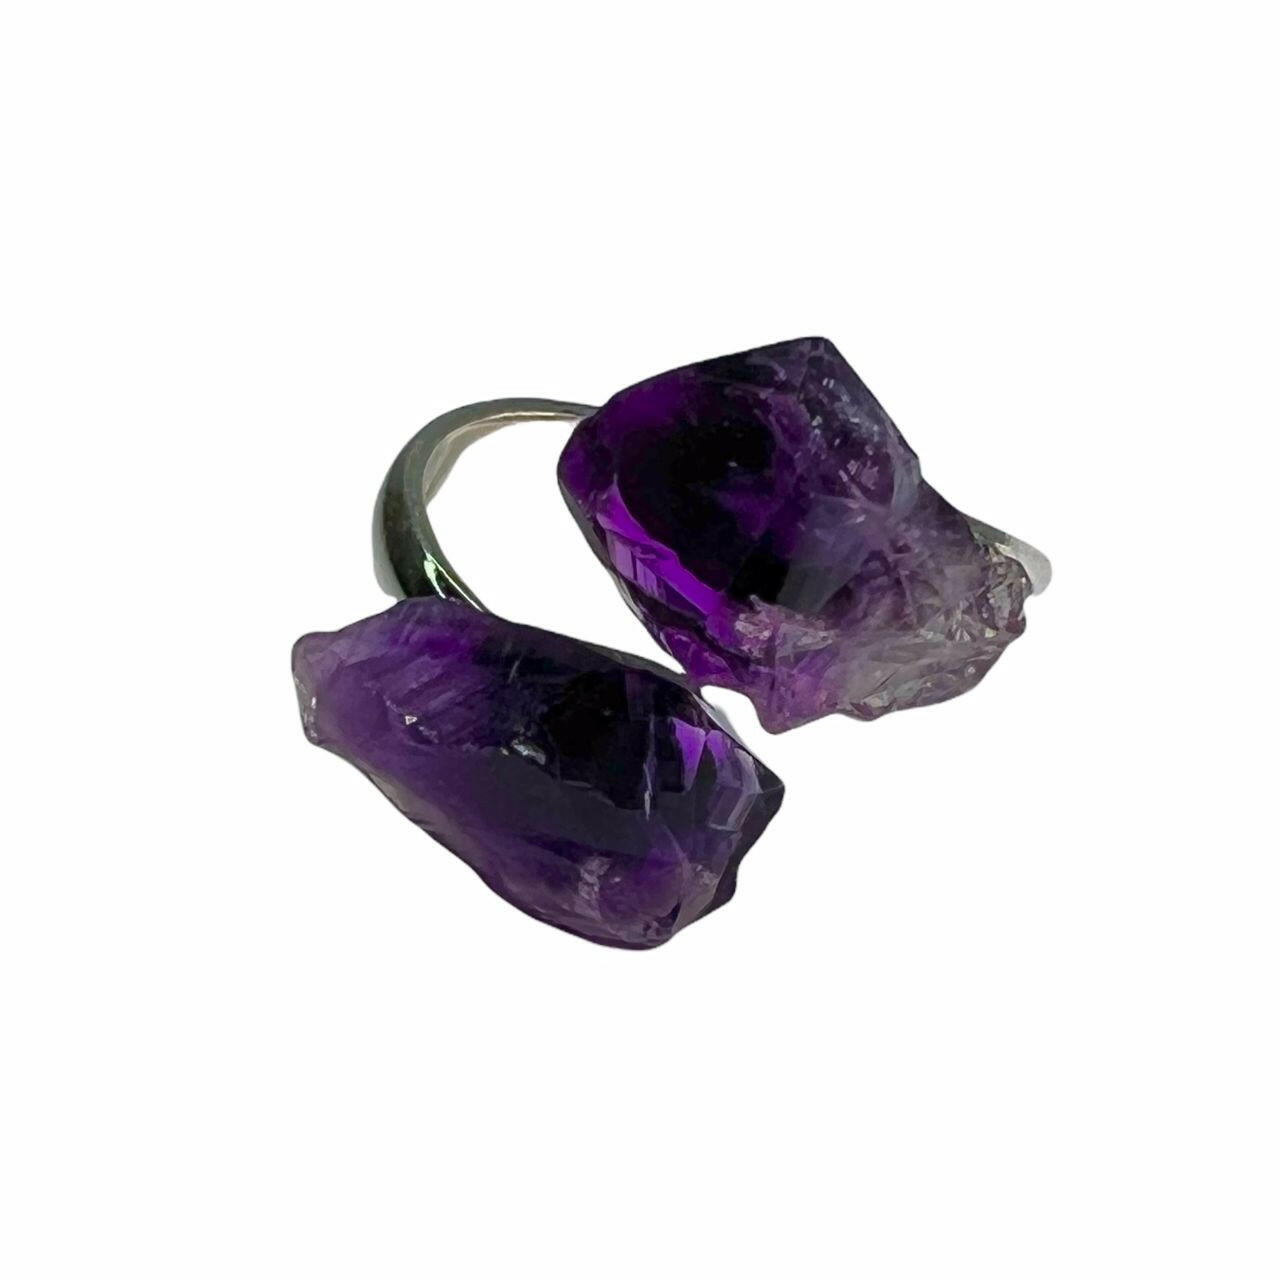 Buy Now Amethyst Gemstone Trilogy Ring in 14k Solid Gold